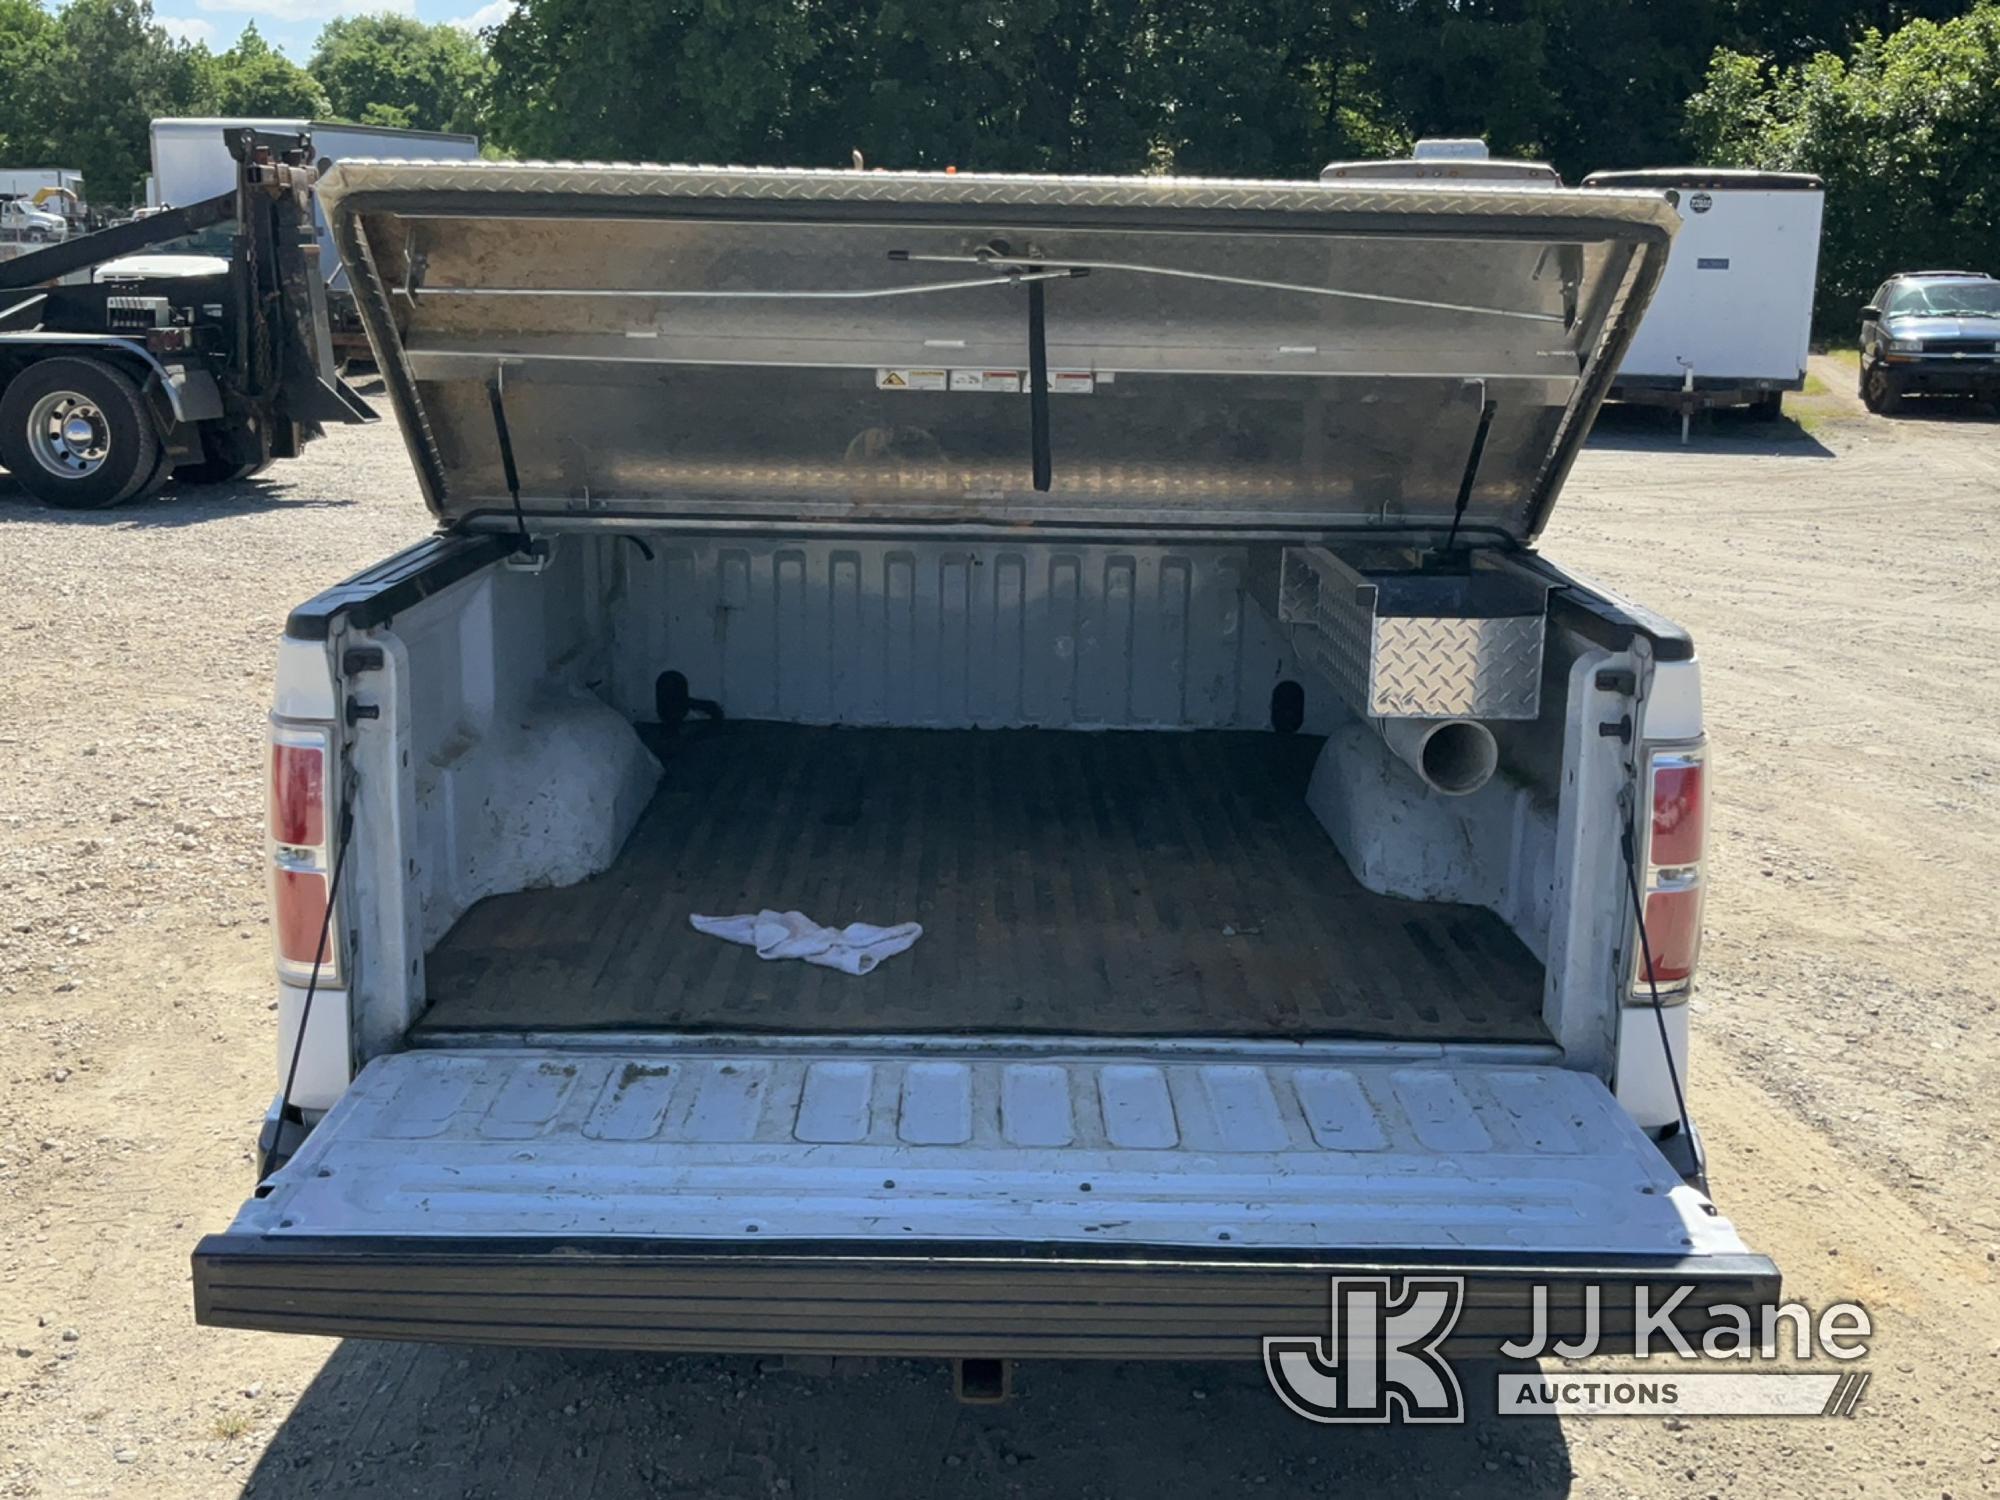 (Charlotte, NC) 2014 Ford F150 4x4 Extended-Cab Pickup Truck Runs & Moves